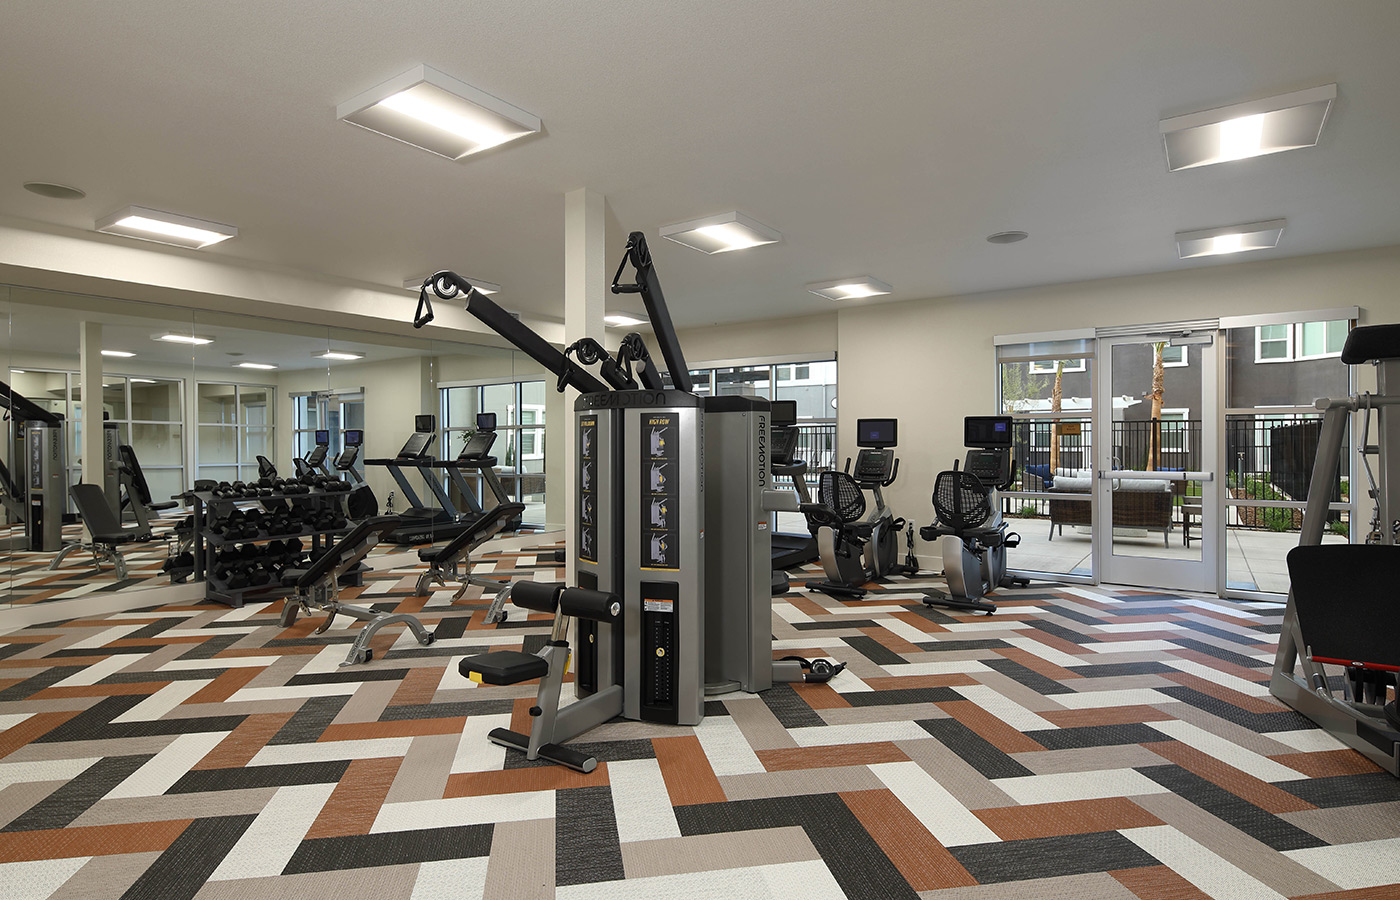 A fitness center with exercise equipment.